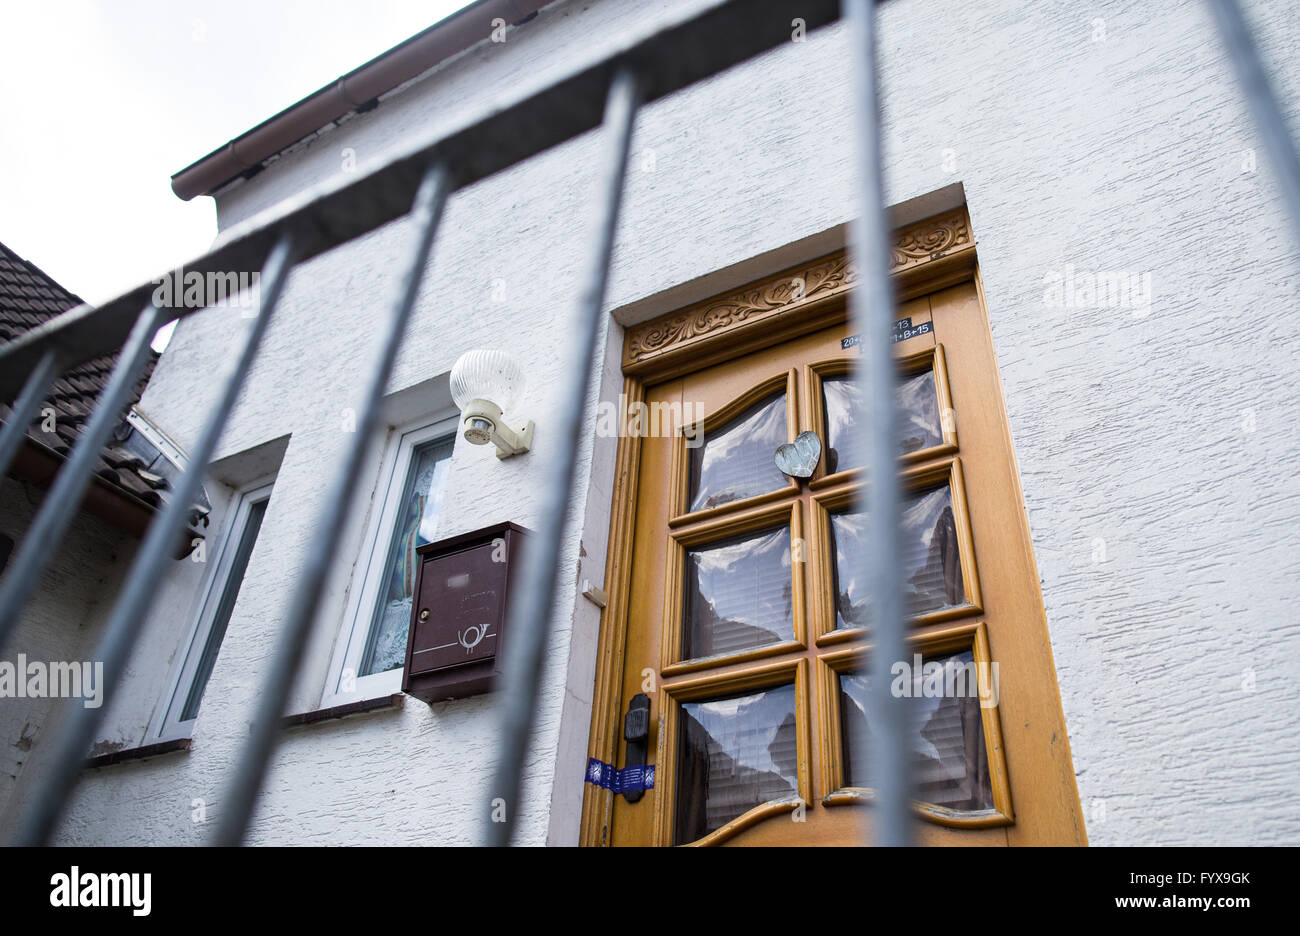 A house in Hoexter, Germany, 29 April 2016. A woman was held captive for weeks in a secluded house and eventually died of heavy abuse, according to the prosecution. The findings imply that the woman met her tantaliser through a partnering advert. PHOTO: MARCEL KUSCH/dpa Stock Photo